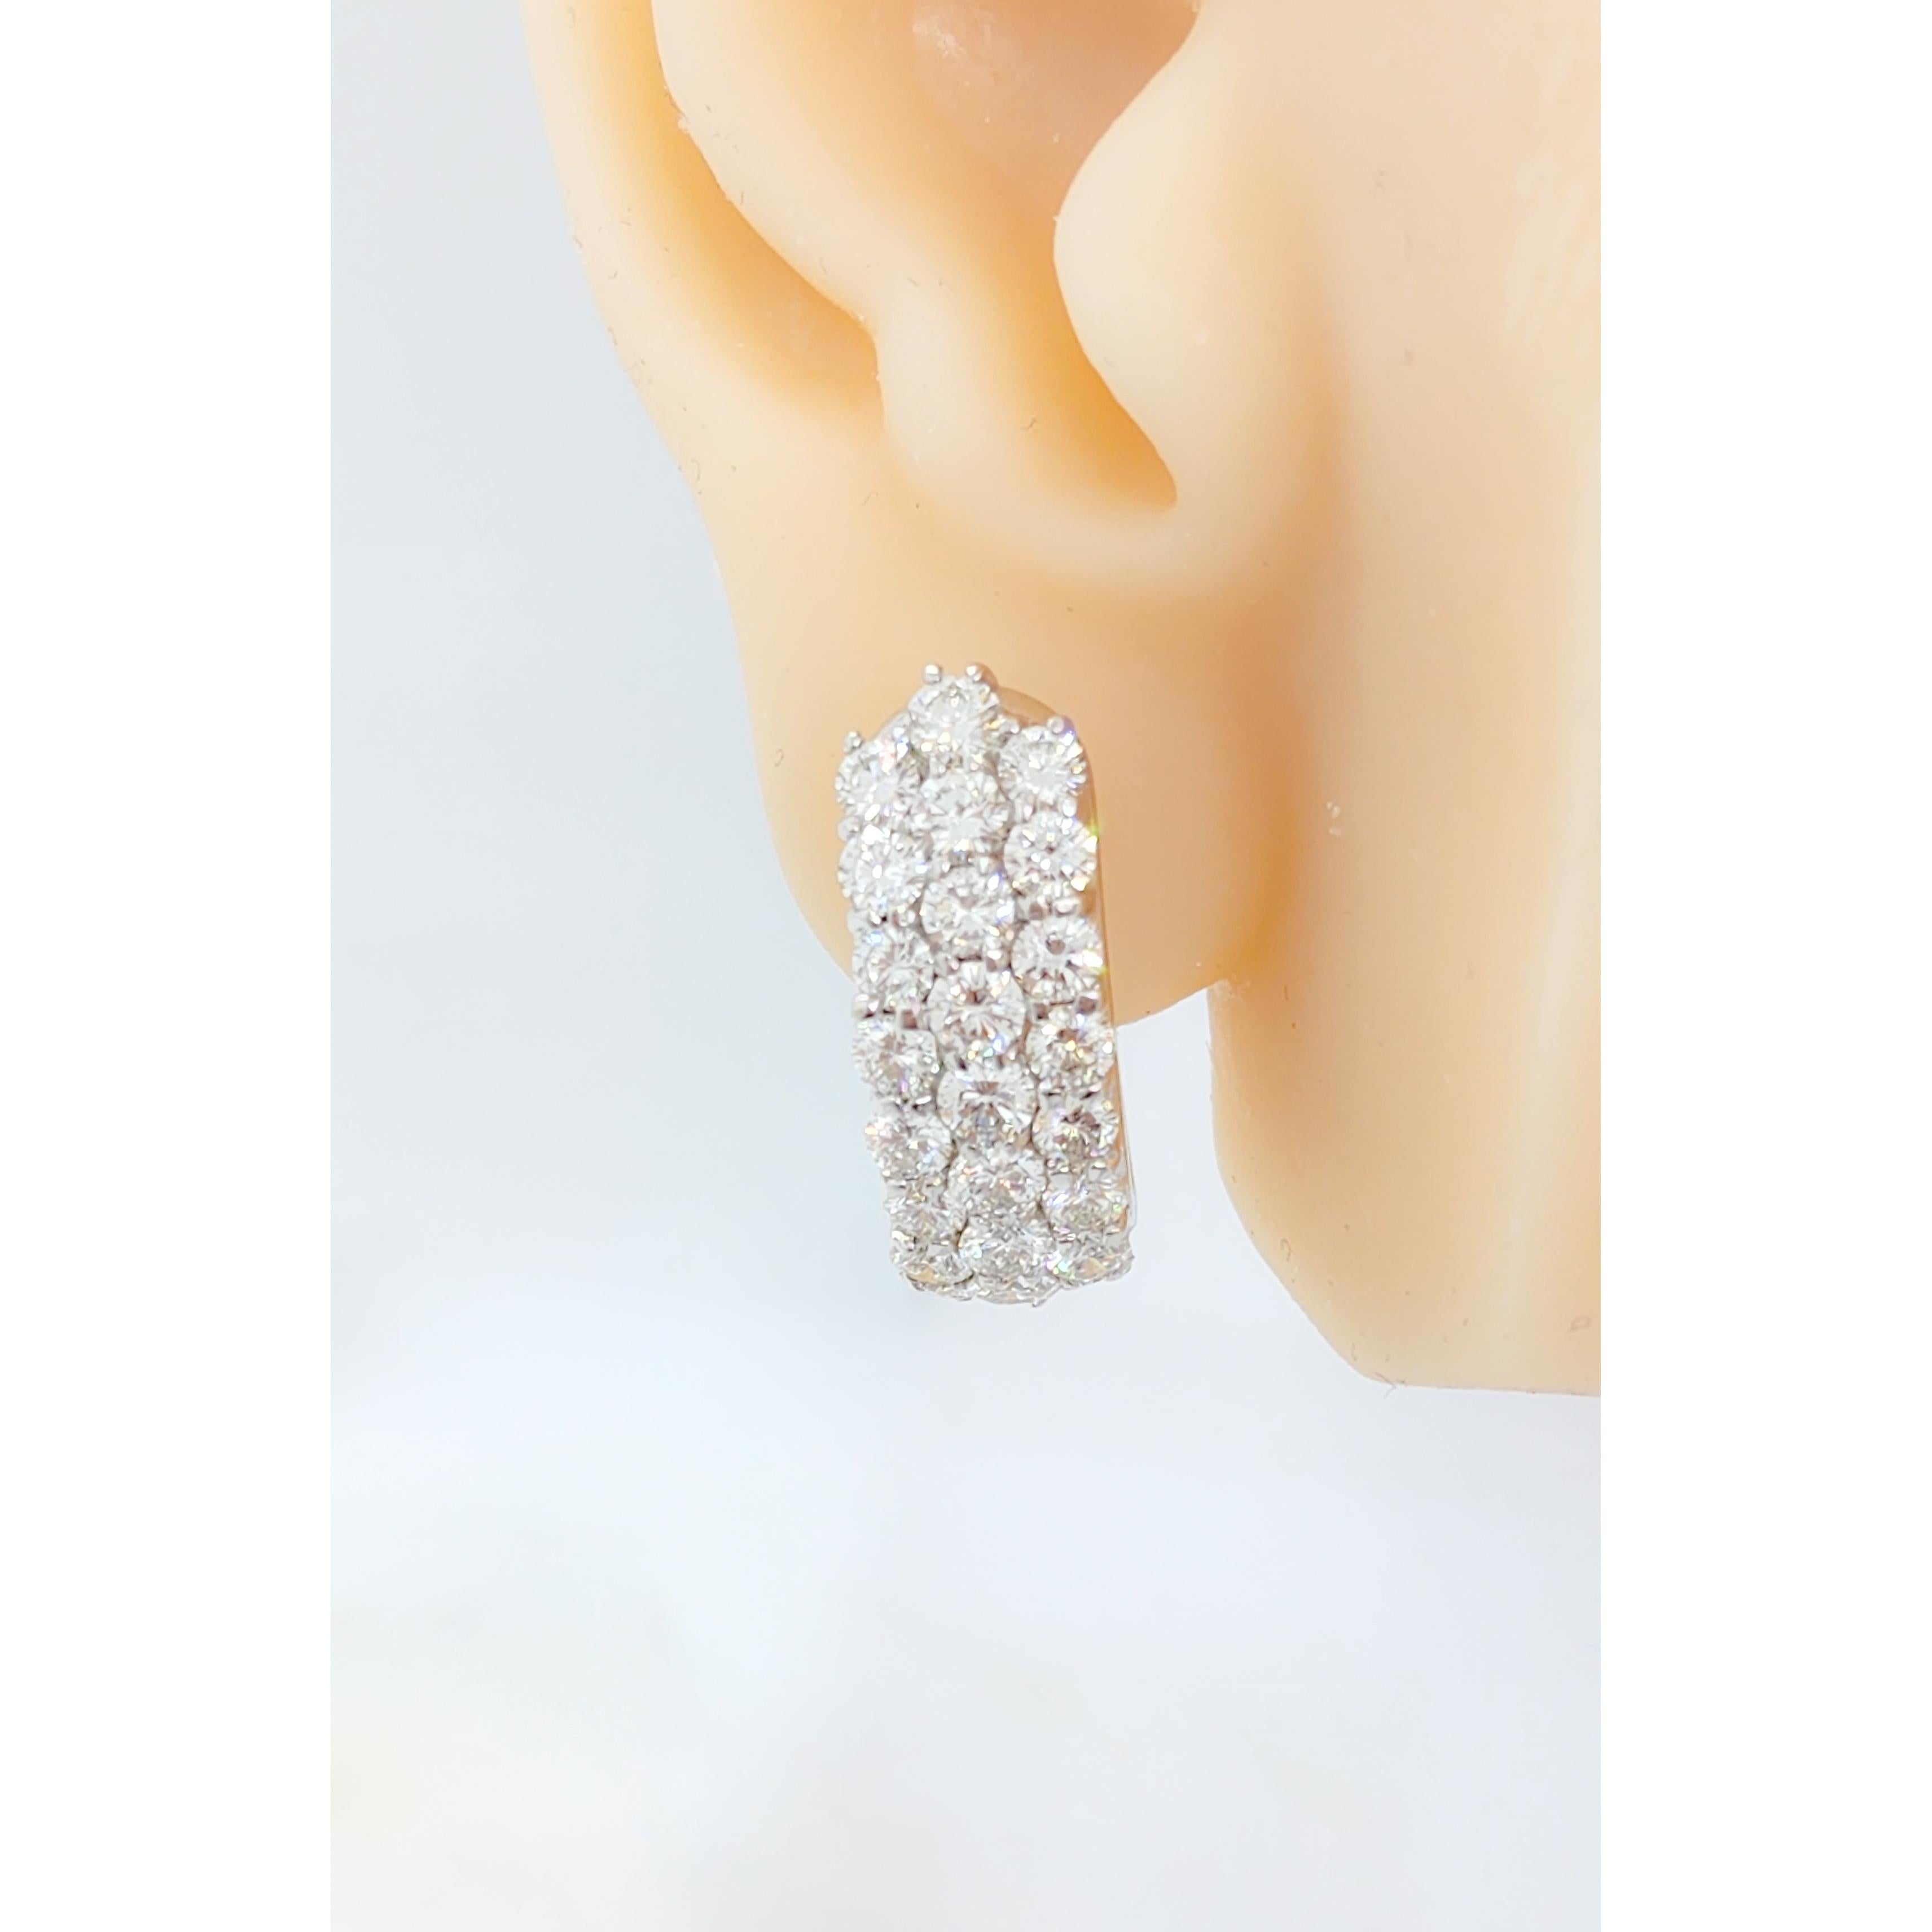 Beautiful white diamond hoops with 5.75 ct. good quality white diamond rounds.  Handmade in 18k white gold.  